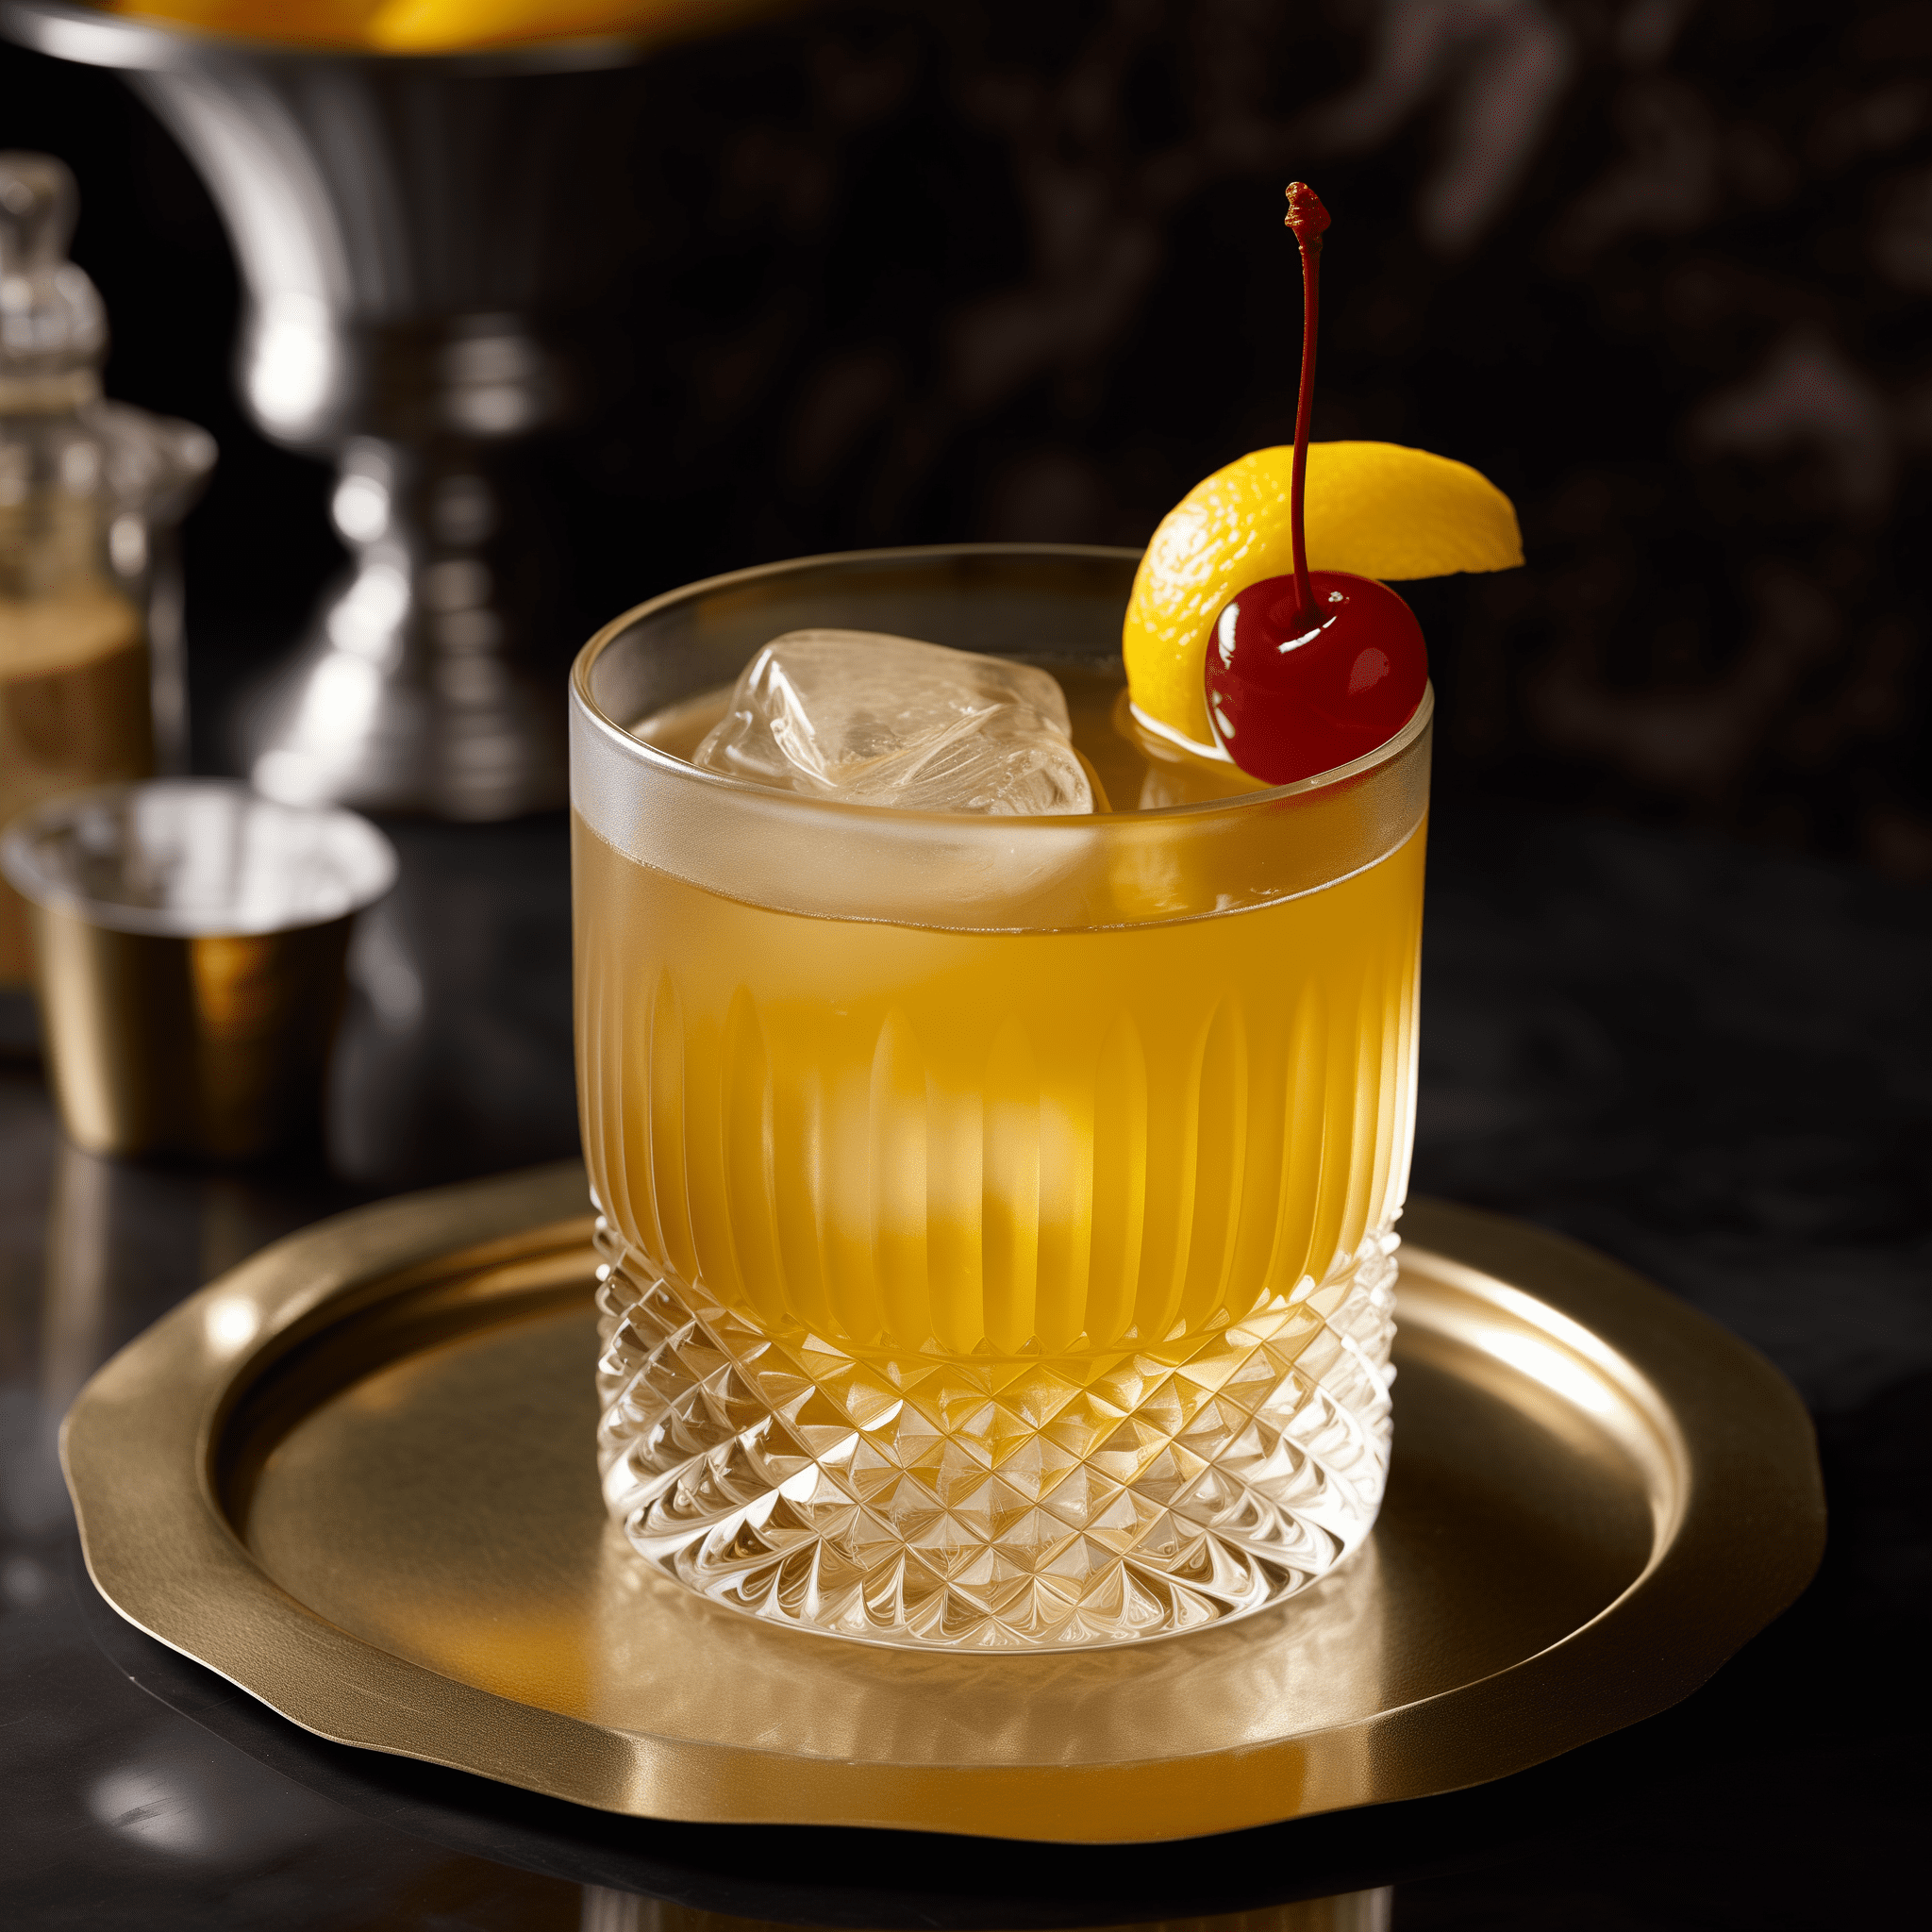 Bourbon Crusta Cocktail Recipe - The Bourbon Crusta is a harmonious blend of sweet, sour, and strong flavors. The bourbon provides a robust and woody backbone, while the citrus and sugar create a refreshing and zesty contrast.